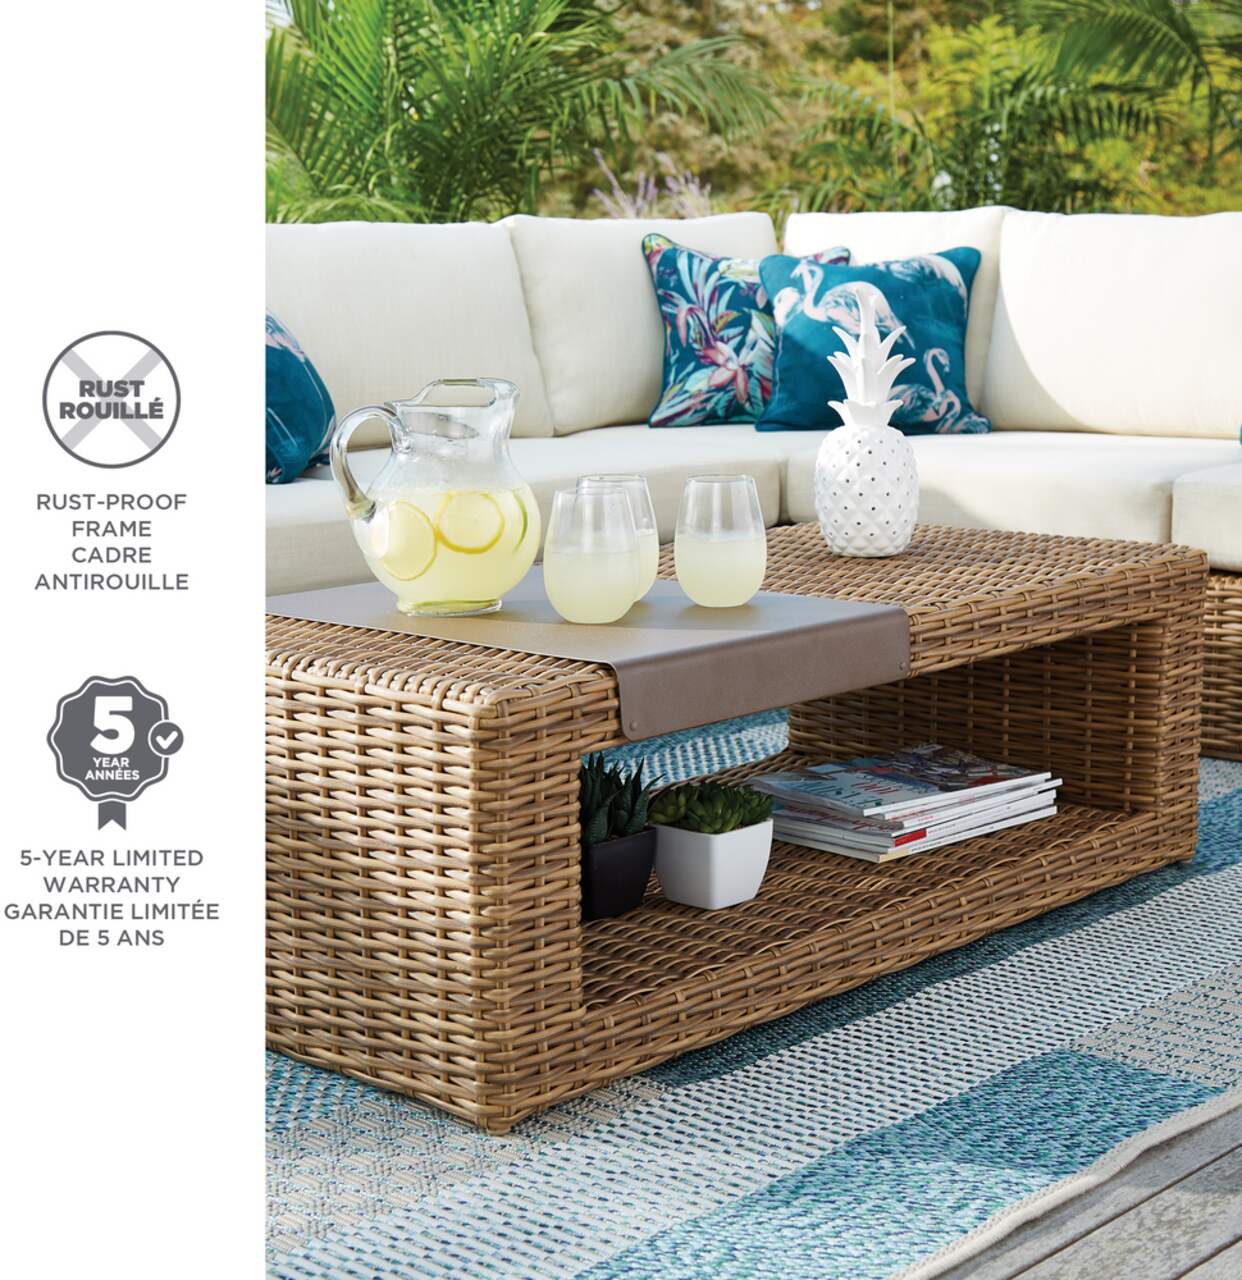 CANVAS Jensen Collection Oval Outdoor/Patio Sectional Coffee Table,  46x24x16-in